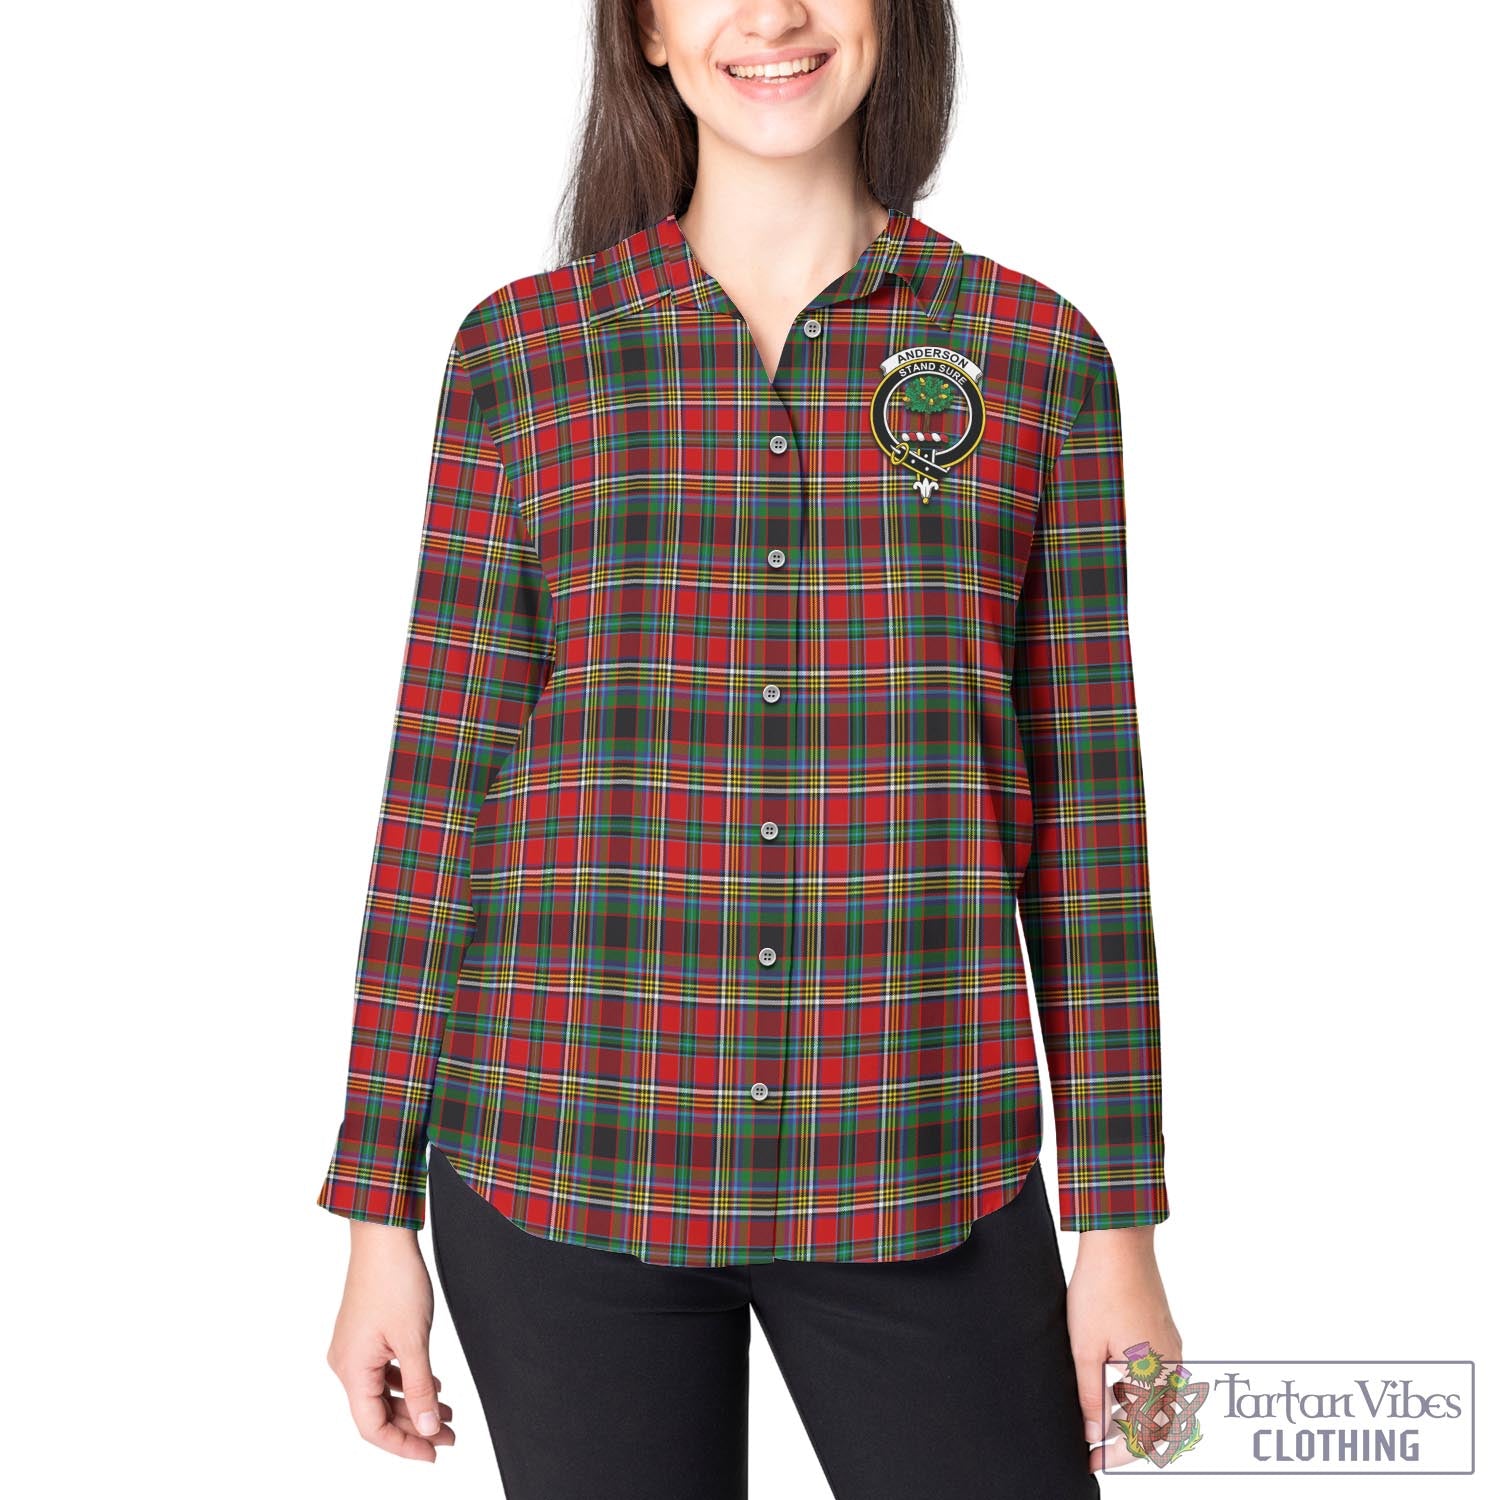 Tartan Vibes Clothing Anderson of Arbrake Tartan Womens Casual Shirt with Family Crest